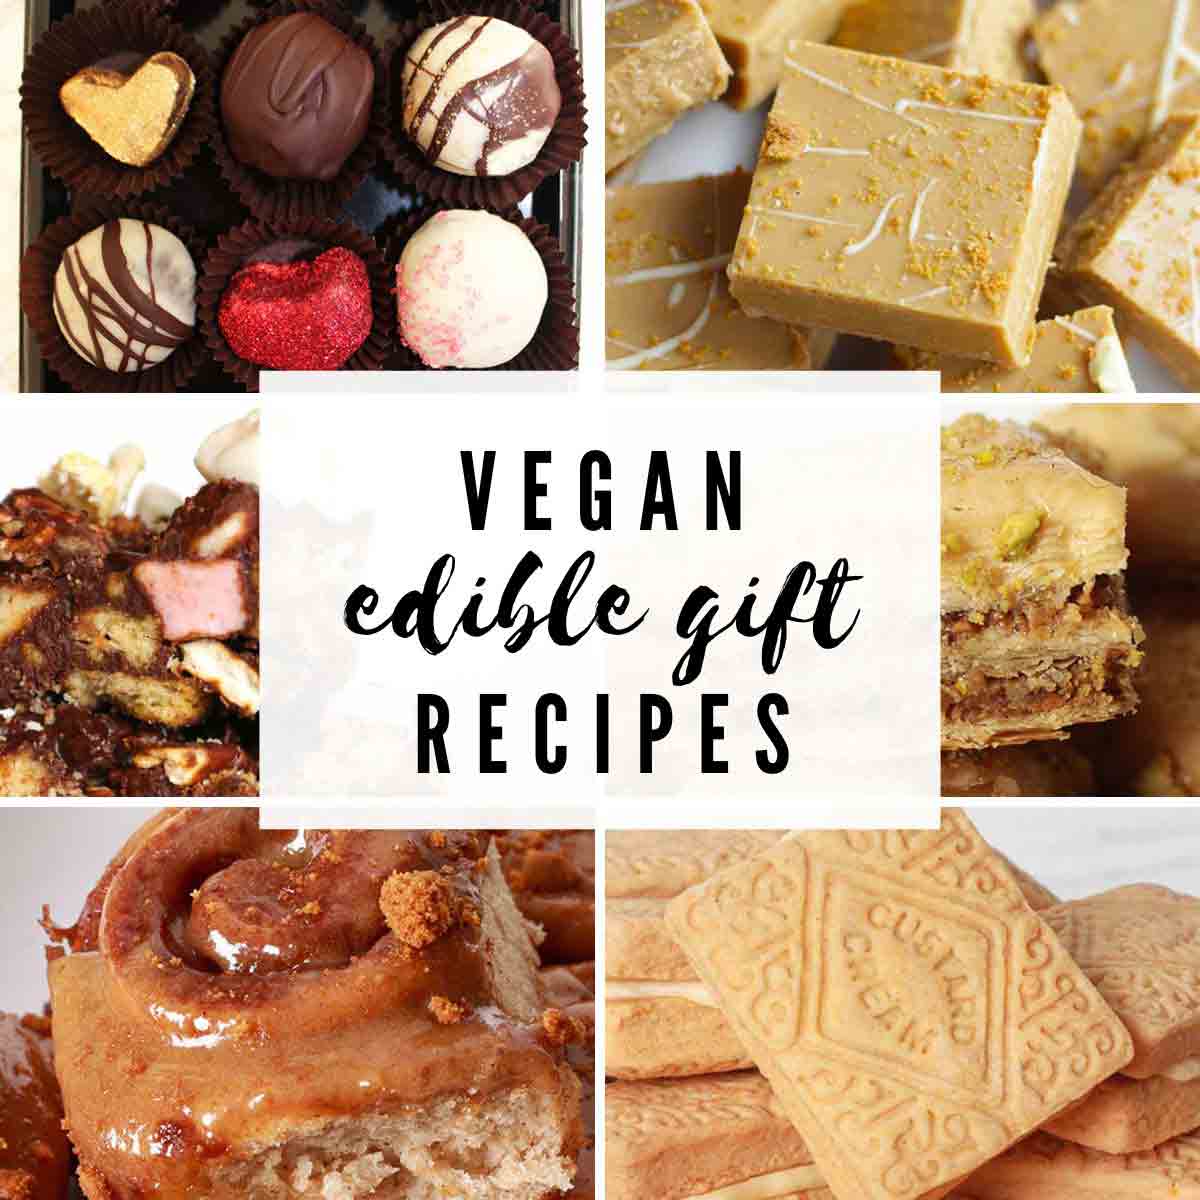 Images Of Edible Gifts With Text Overlay That Reads 'vegan Edible Gift Recipes'